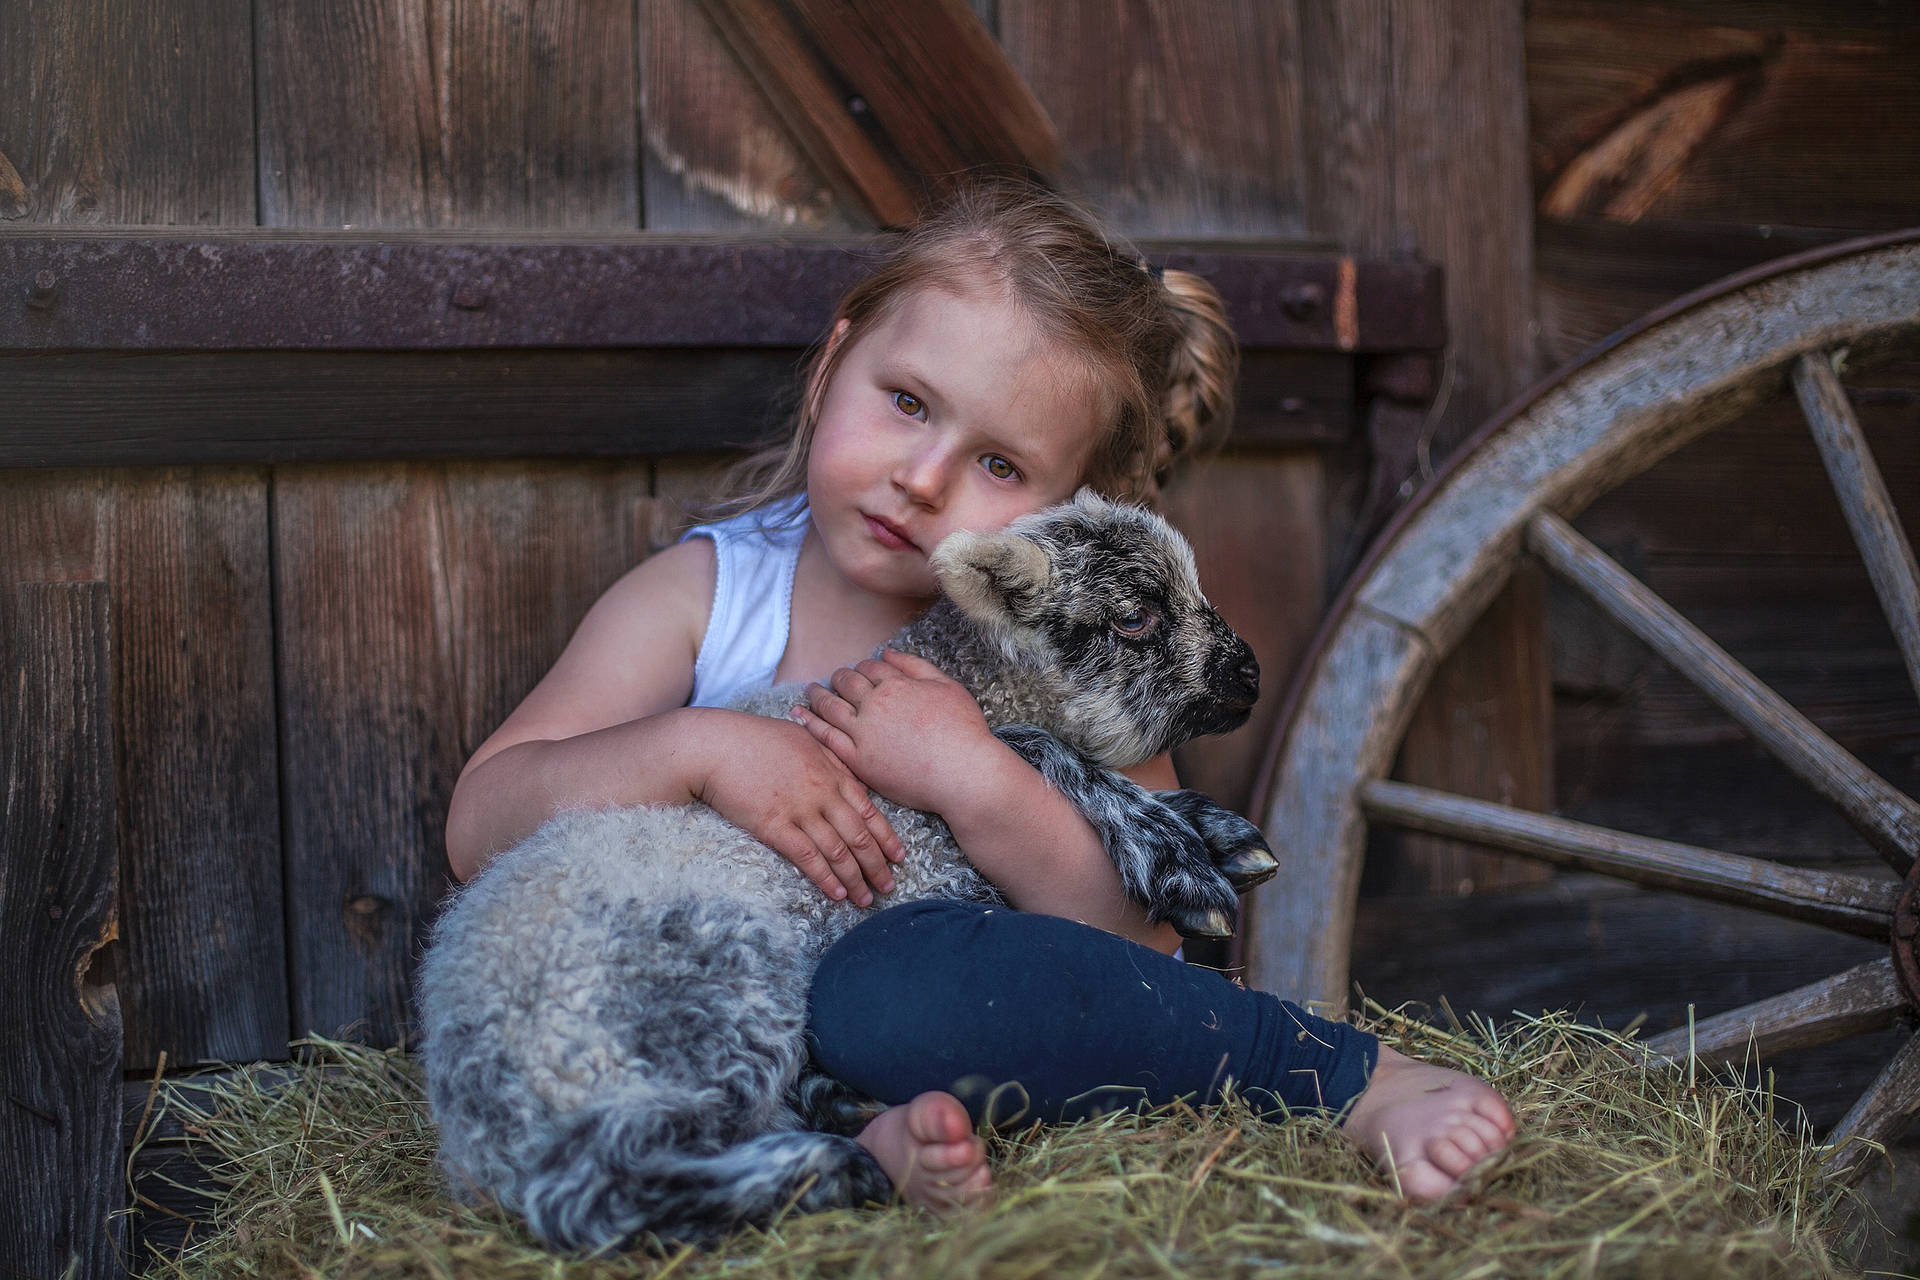 Adorable Girl Playing With Sheep In A Barn Background